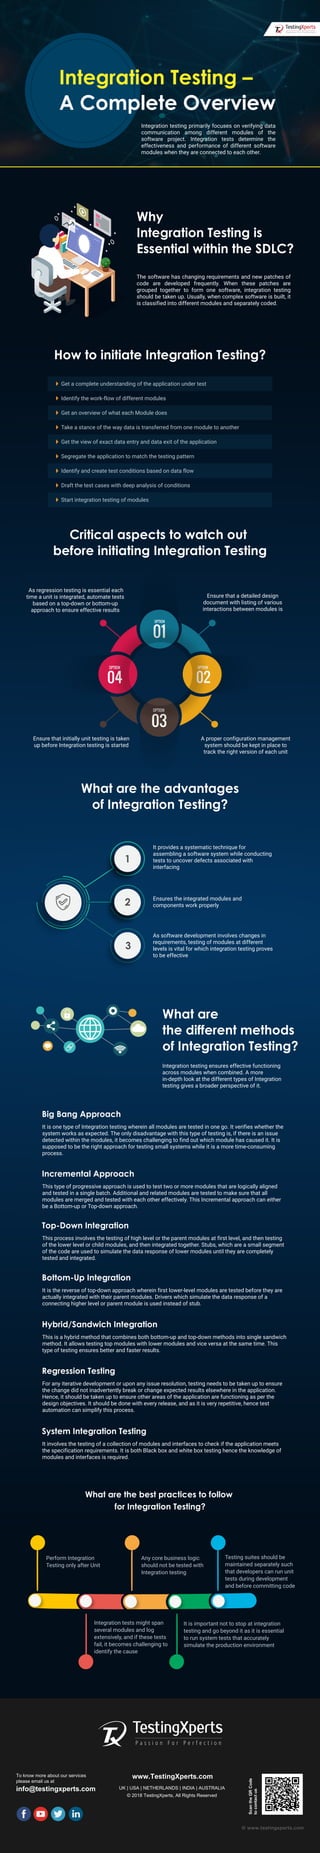 Integration Testing –
A Complete Overview
Integration testing primarily focuses on verifying data
communication among different modules of the
software project. Integration tests determine the
effectiveness and performance of different software
modules when they are connected to each other.
The software has changing requirements and new patches of
code are developed frequently. When these patches are
grouped together to form one software, integration testing
should be taken up. Usually, when complex software is built, it
is classified into different modules and separately coded.
Ensure that a detailed design
document with listing of various
interactions between modules is
As regression testing is essential each
time a unit is integrated, automate tests
based on a top-down or bottom-up
approach to ensure effective results
A proper configuration management
system should be kept in place to
track the right version of each unit
Ensure that initially unit testing is taken
up before Integration testing is started
It provides a systematic technique for
assembling a software system while conducting
tests to uncover defects associated with
interfacing
Integration testing ensures effective functioning
across modules when combined. A more
in-depth look at the different types of Integration
testing gives a broader perspective of it.
It is one type of Integration testing wherein all modules are tested in one go. It verifies whether the
system works as expected. The only disadvantage with this type of testing is, if there is an issue
detected within the modules, it becomes challenging to find out which module has caused it. It is
supposed to be the right approach for testing small systems while it is a more time-consuming
process.
As software development involves changes in
requirements, testing of modules at different
levels is vital for which integration testing proves
to be effective
Ensures the integrated modules and
components work properly
Why
Integration Testing is
Essential within the SDLC?
How to initiate Integration Testing?
Critical aspects to watch out
before initiating Integration Testing
What are the advantages
of Integration Testing?
What are
the different methods
of Integration Testing?
Big Bang Approach
This type of progressive approach is used to test two or more modules that are logically aligned
and tested in a single batch. Additional and related modules are tested to make sure that all
modules are merged and tested with each other effectively. This Incremental approach can either
be a Bottom-up or Top-down approach.
Incremental Approach
This process involves the testing of high level or the parent modules at first level, and then testing
of the lower level or child modules, and then integrated together. Stubs, which are a small segment
of the code are used to simulate the data response of lower modules until they are completely
tested and integrated.
Top-Down Integration
It is the reverse of top-down approach wherein first lower-level modules are tested before they are
actually integrated with their parent modules. Drivers which simulate the data response of a
connecting higher level or parent module is used instead of stub.
Bottom-Up Integration
This is a hybrid method that combines both bottom-up and top-down methods into single sandwich
method. It allows testing top modules with lower modules and vice versa at the same time. This
type of testing ensures better and faster results.
Hybrid/Sandwich Integration
For any iterative development or upon any issue resolution, testing needs to be taken up to ensure
the change did not inadvertently break or change expected results elsewhere in the application.
Hence, it should be taken up to ensure other areas of the application are functioning as per the
design objectives. It should be done with every release, and as it is very repetitive, hence test
automation can simplify this process.
Regression Testing
It involves the testing of a collection of modules and interfaces to check if the application meets
the specification requirements. It is both Black box and white box testing hence the knowledge of
modules and interfaces is required.
System Integration Testing
What are the best practices to follow
for Integration Testing?
Get a complete understanding of the application under test
Identify the work-flow of different modules
Get an overview of what each Module does
Take a stance of the way data is transferred from one module to another
Get the view of exact data entry and data exit of the application
Segregate the application to match the testing pattern
Identify and create test conditions based on data flow
Draft the test cases with deep analysis of conditions
Start integration testing of modules
Any core business logic
should not be tested with
Integration testing
Testing suites should be
maintained separately such
that developers can run unit
tests during development
and before committing code
Perform Integration
Testing only after Unit
Integration tests might span
several modules and log
extensively, and if these tests
fail, it becomes challenging to
identify the cause
It is important not to stop at integration
testing and go beyond it as it is essential
to run system tests that accurately
simulate the production environment
To know more about our services
please email us at
info@testingxperts.com
www.TestingXperts.com
UK | USA | NETHERLANDS | INDIA | AUSTRALIA
© 2018 TestingXperts, All Rights Reserved
ScantheQRCode
tocontactus
© www.testingxperts.com
 